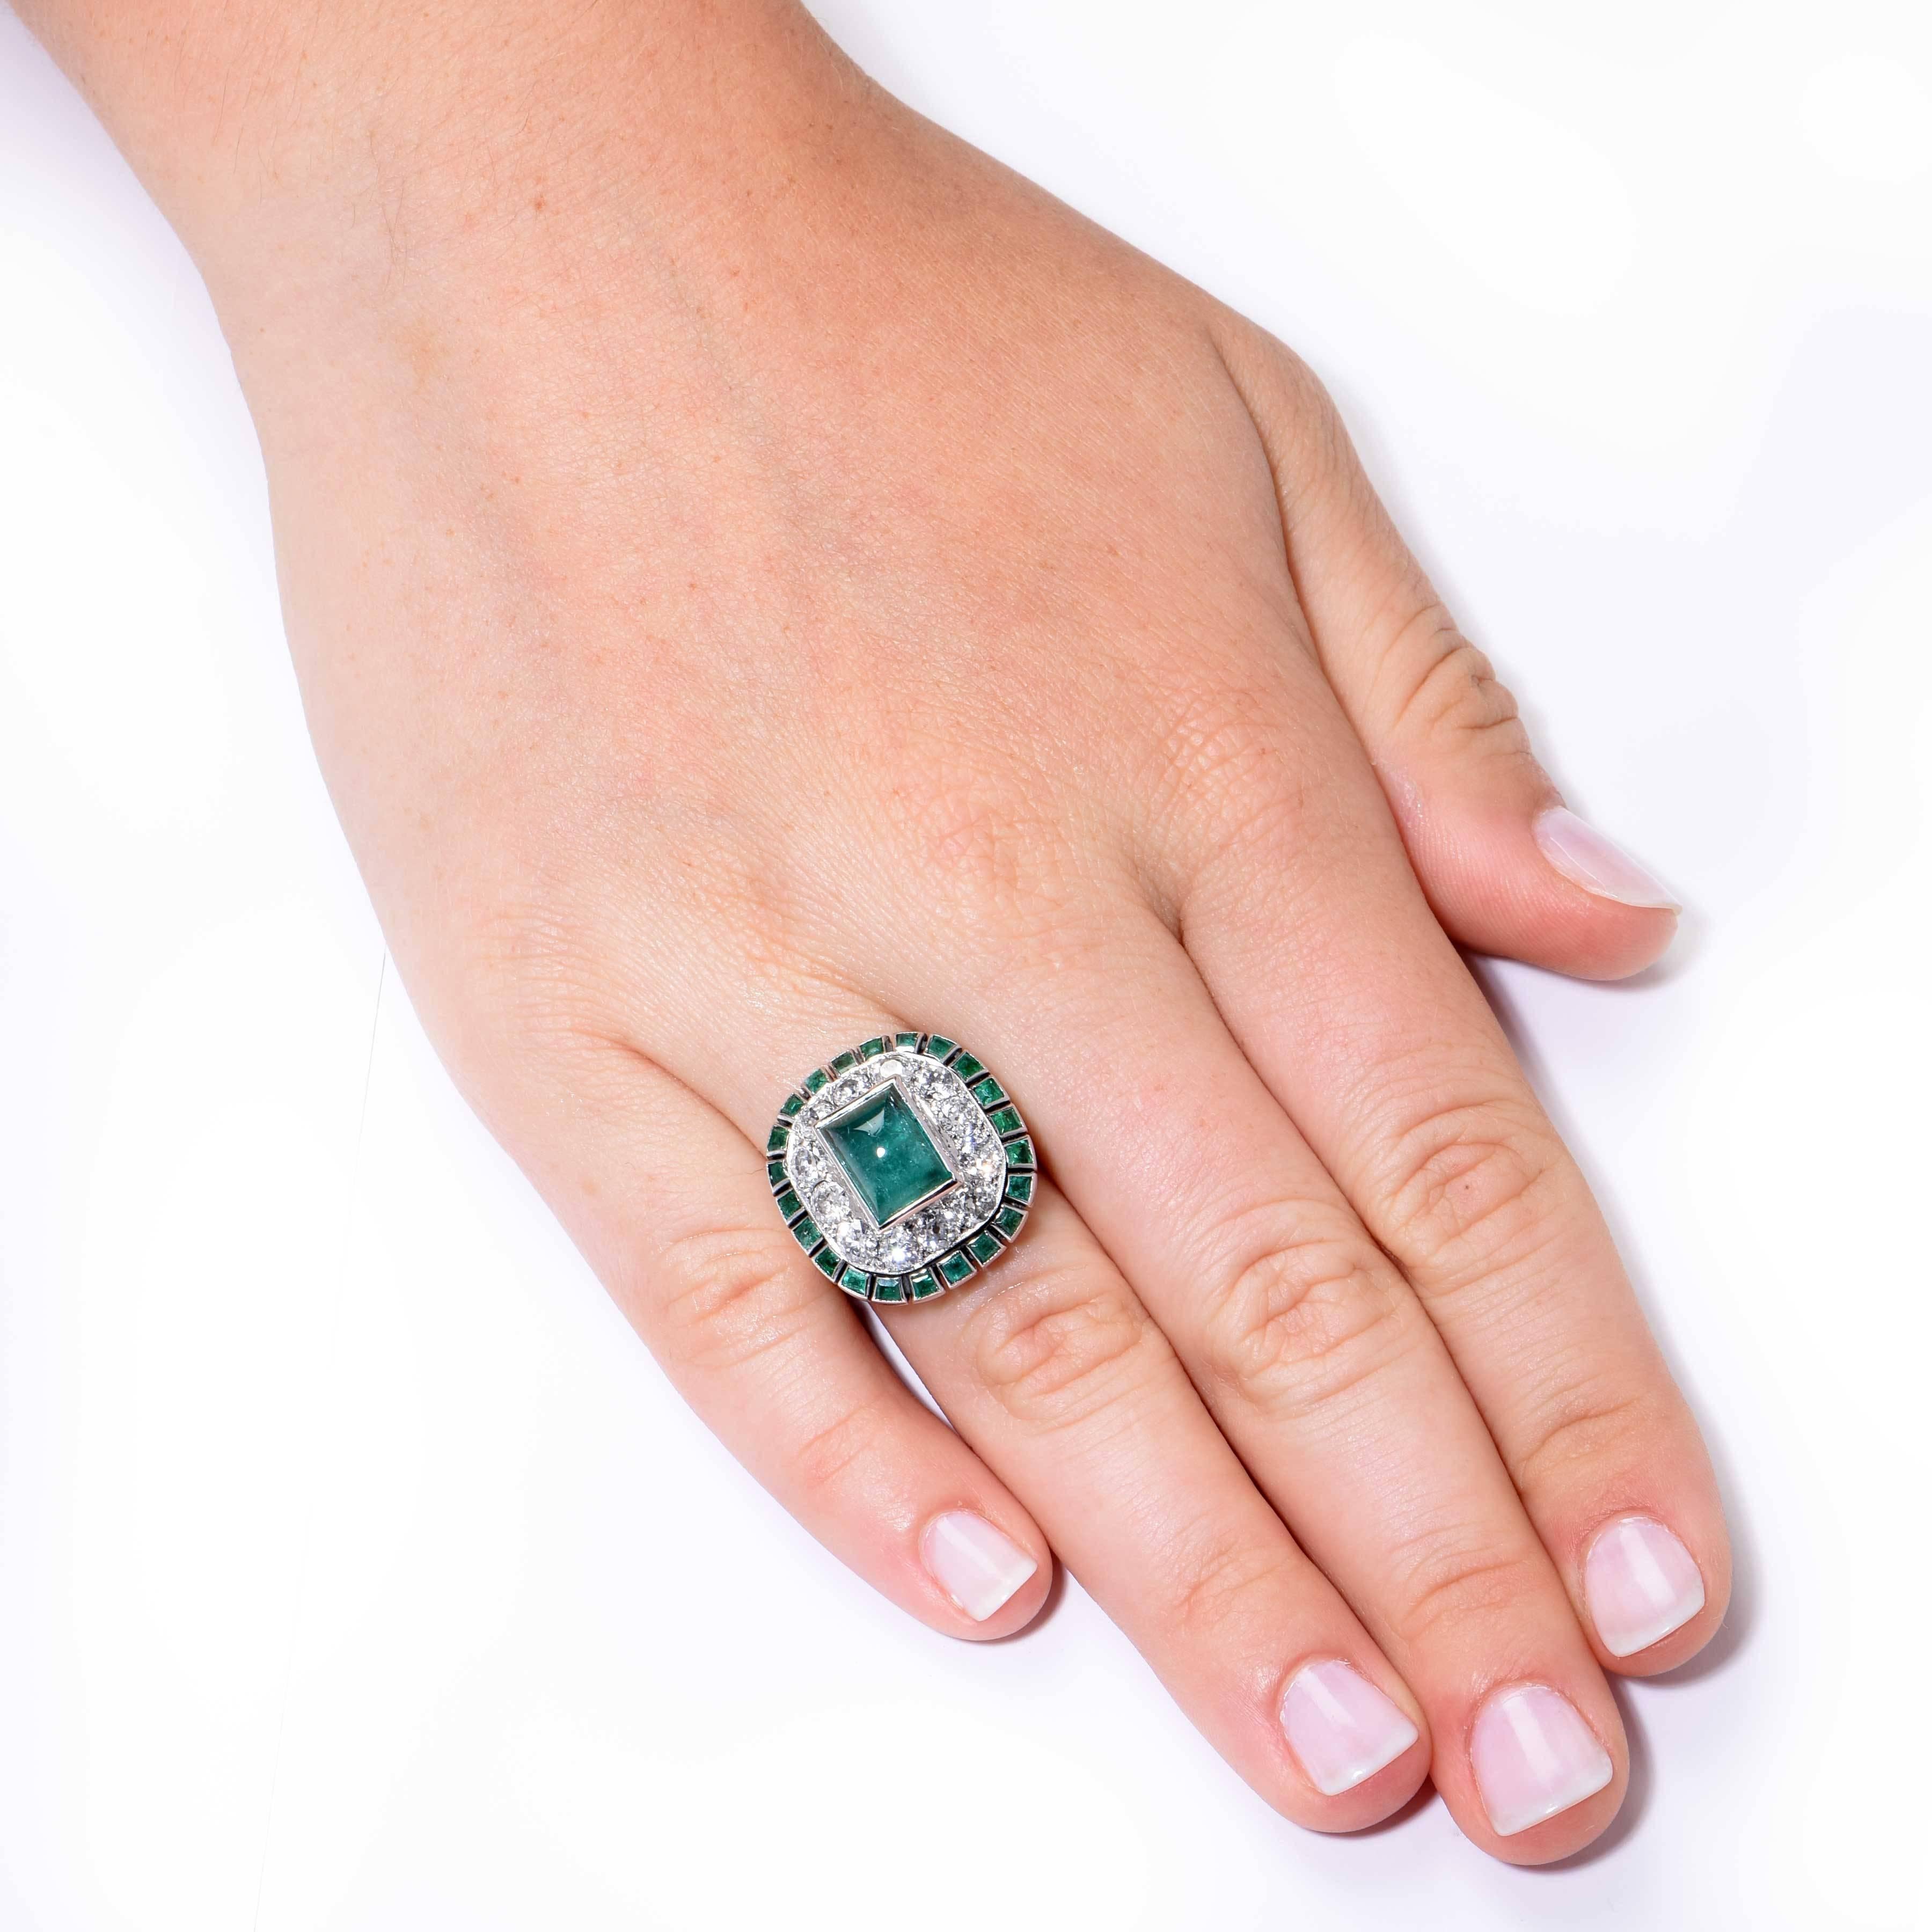 This sugarloaf cabochon bezel set emerald sits in the center, surrounded by one row of 12 Old European cut diamonds weighing approximately 1.70 carats. It is further surrounded by a row of small bezel set emeralds. 

Size 8 1/2  (Can be sized)
Metal